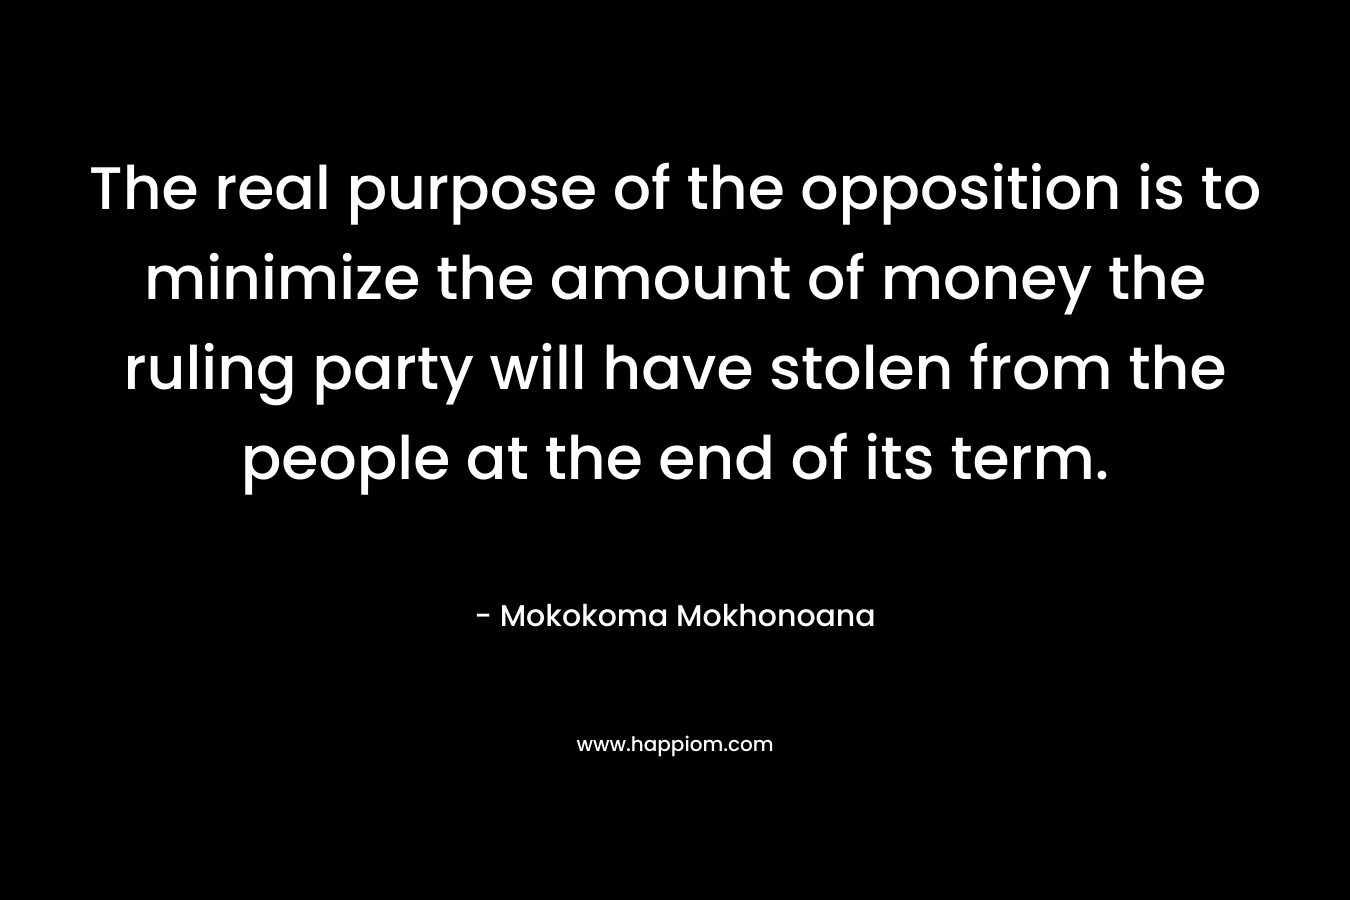 The real purpose of the opposition is to minimize the amount of money the ruling party will have stolen from the people at the end of its term. – Mokokoma Mokhonoana